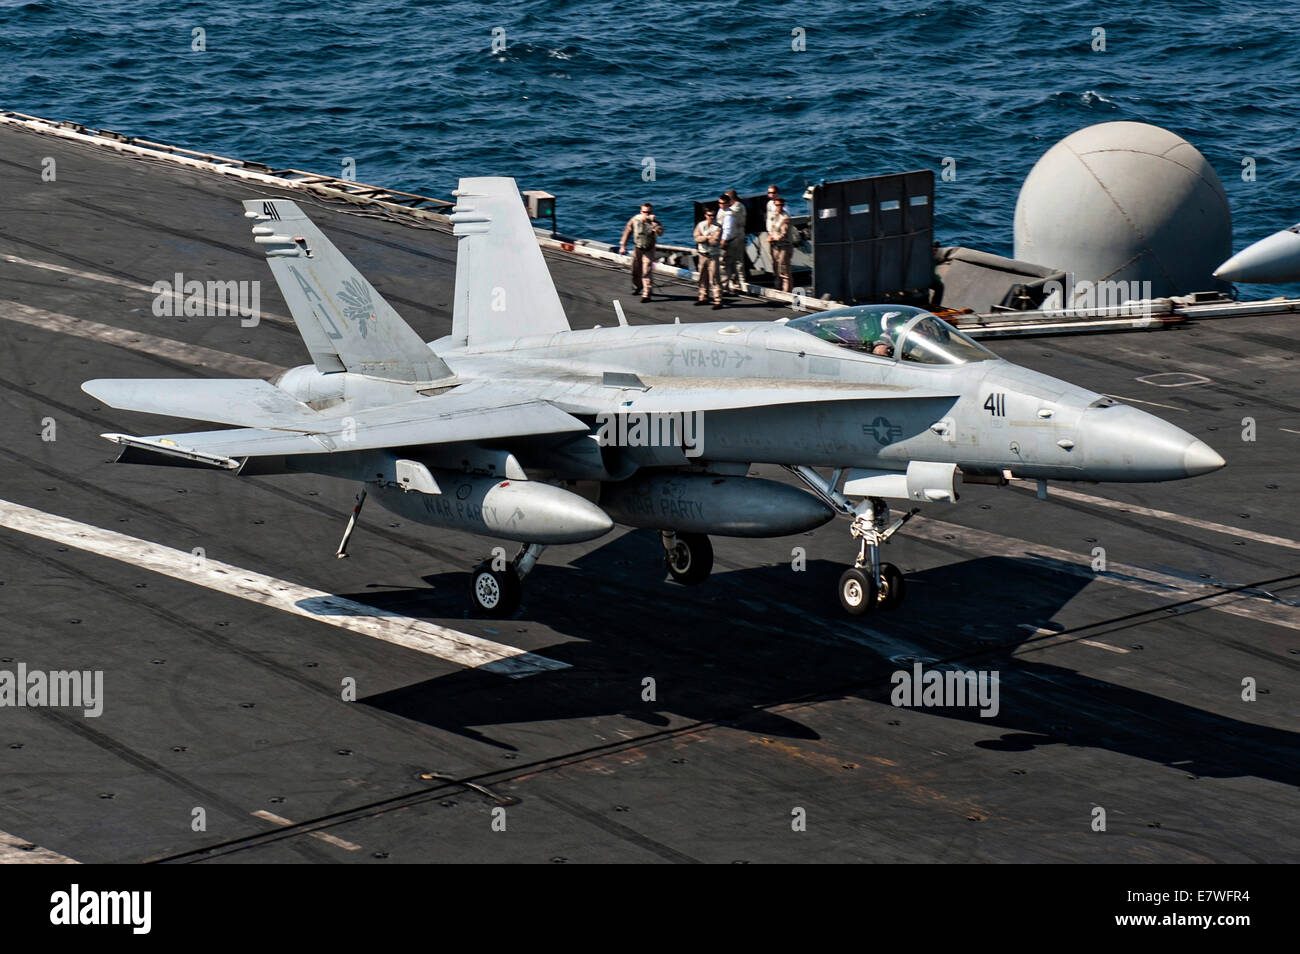 A US Navy F/A-18C Hornet fighter aircraft lands on the flight deck of the aircraft carrier USS George H.W. Bush after returning from a combat sortie against ISIS targets September 23, 2014 in the Persian Gulf. The military launched the first direct strikes on ISIS targets inside Syria. Stock Photo